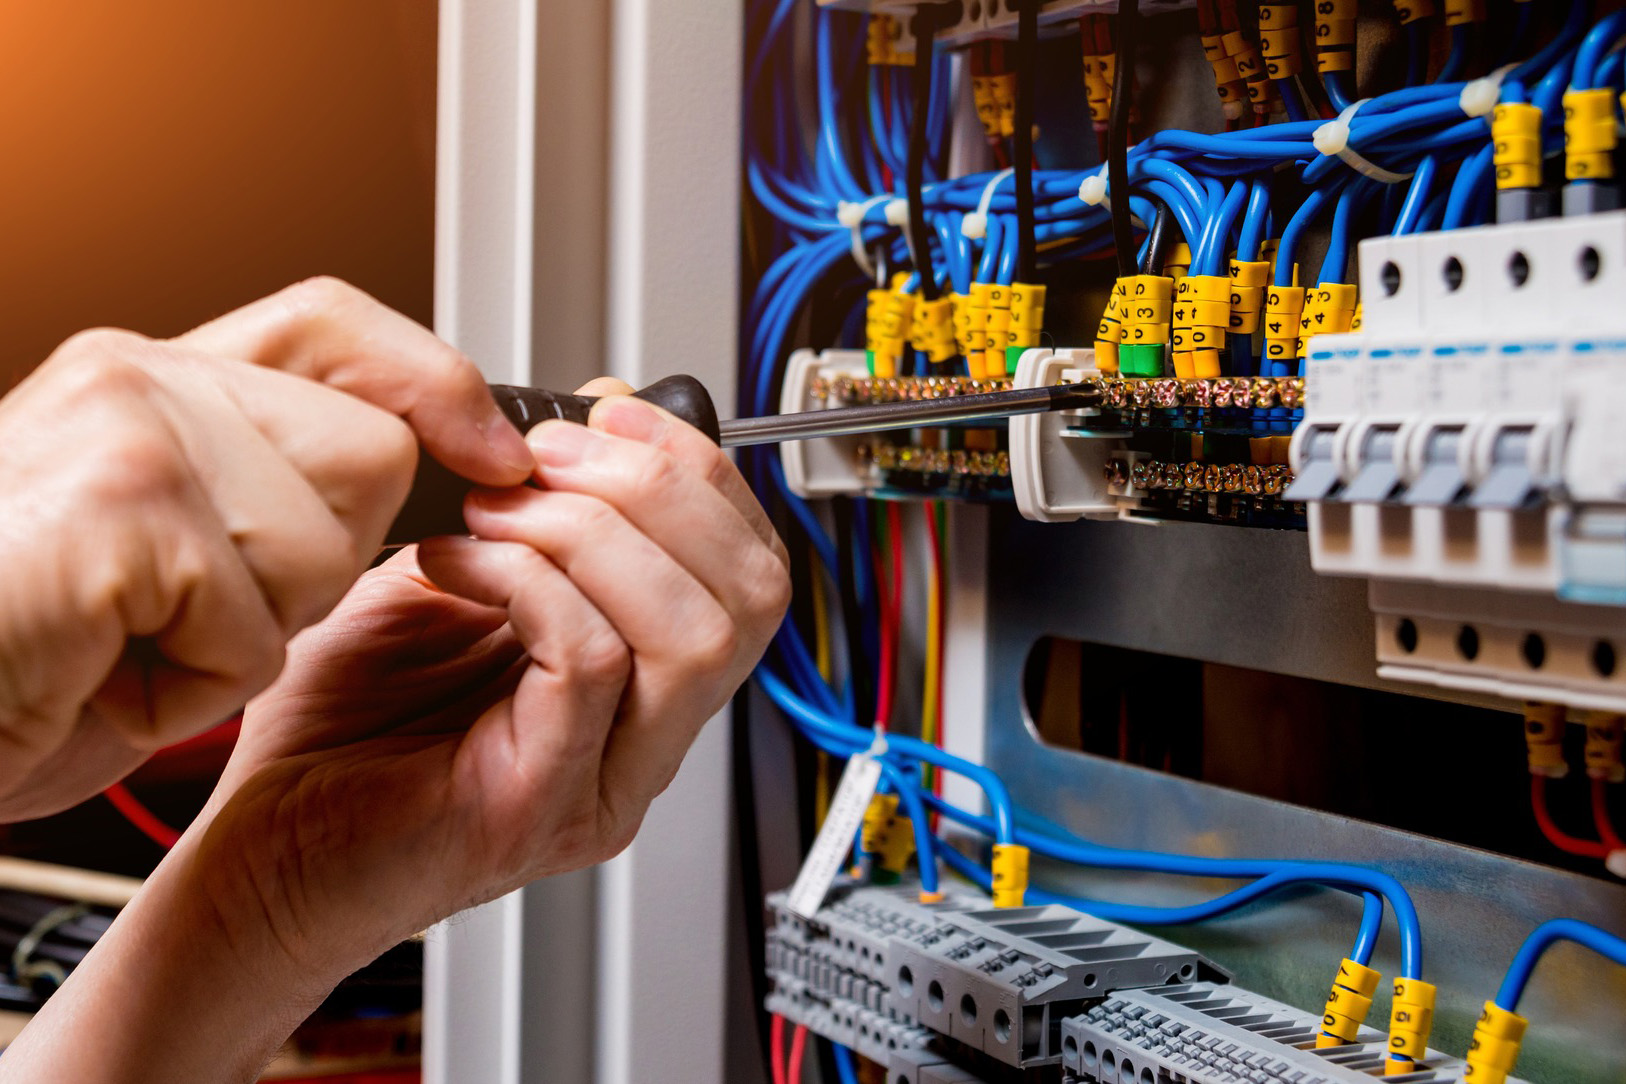 Electricians hands, using screwdriver to repair fuse box - Springfield, IL